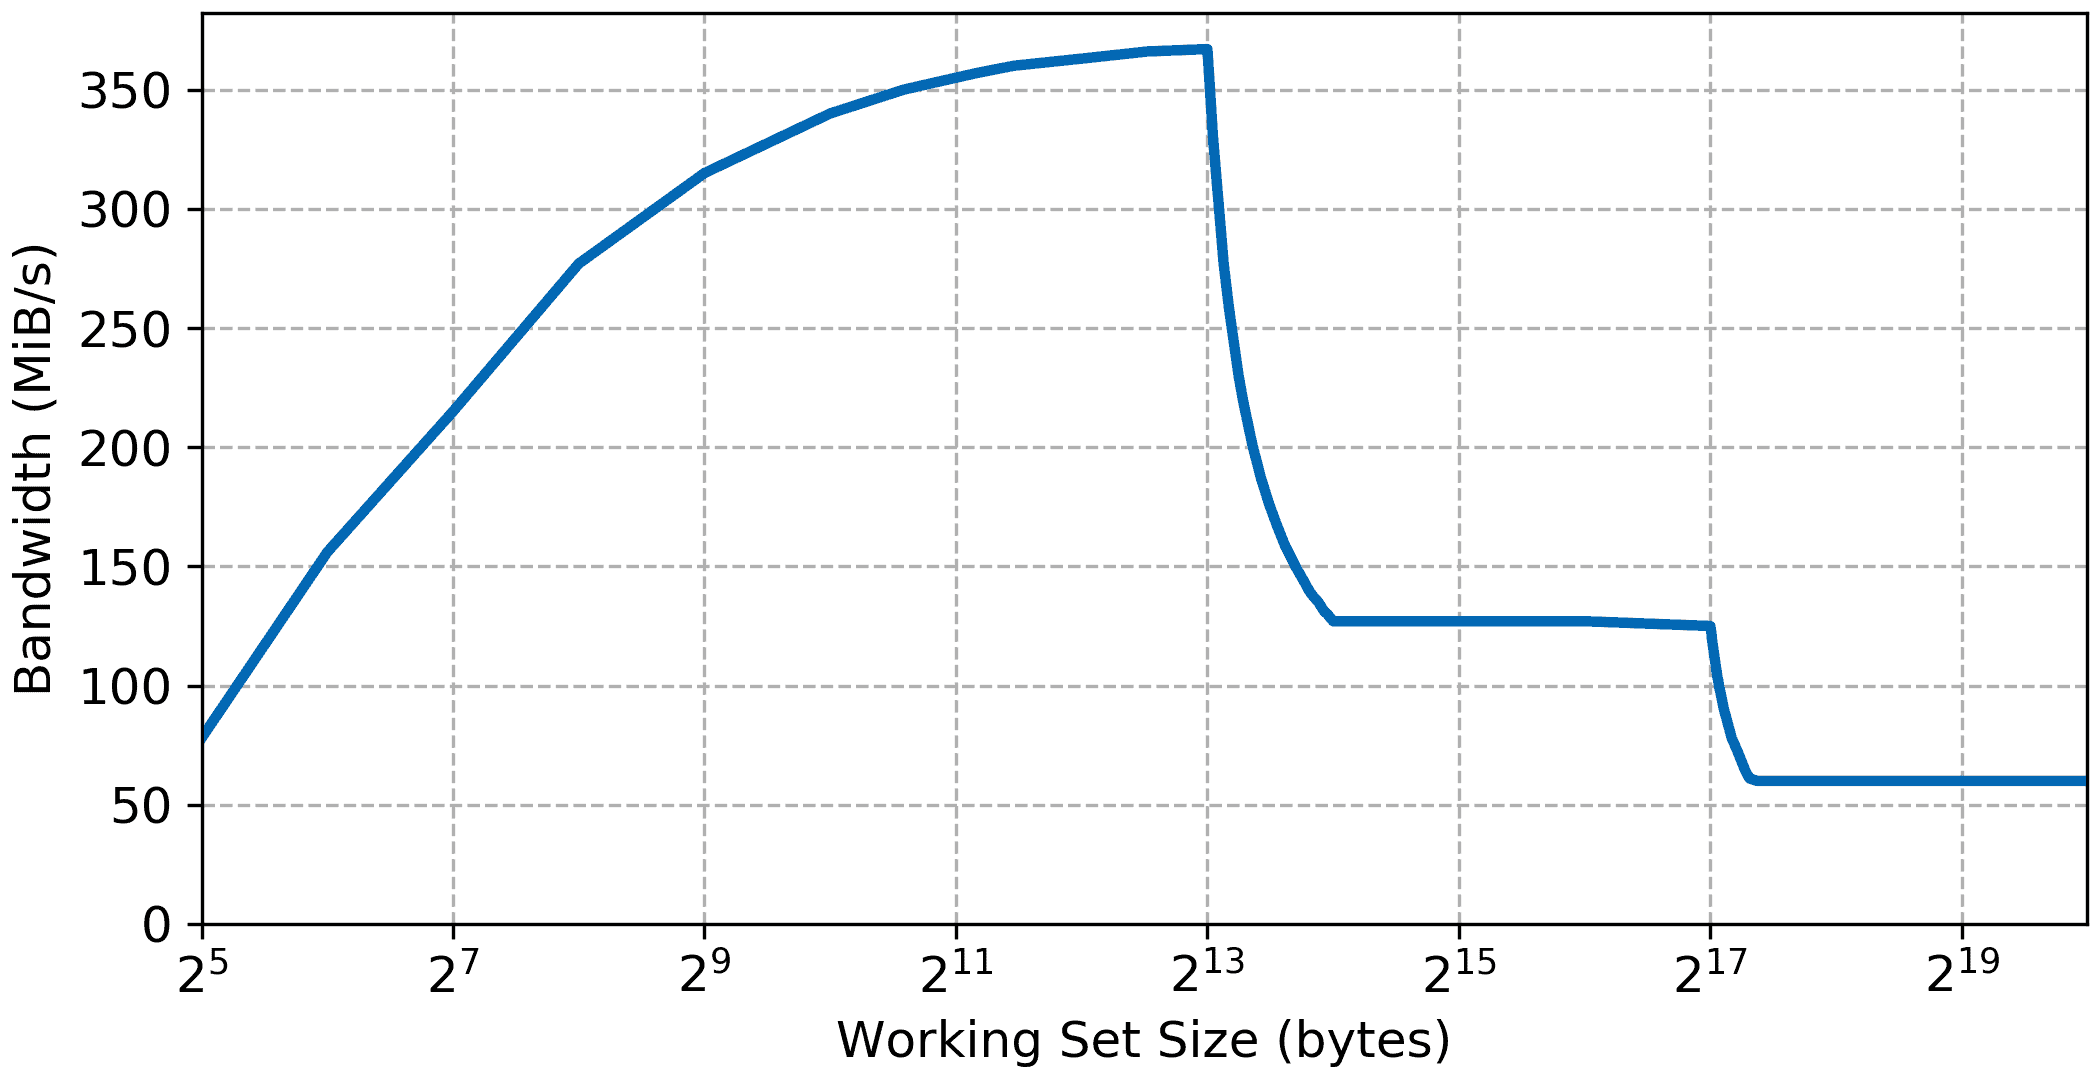 Plot of the Microblaze memory read bandwidth versus the working set size when running from external DDR SDRAM memory with 16KiB of level 1 cache and 128 KiB of level 2 cache.